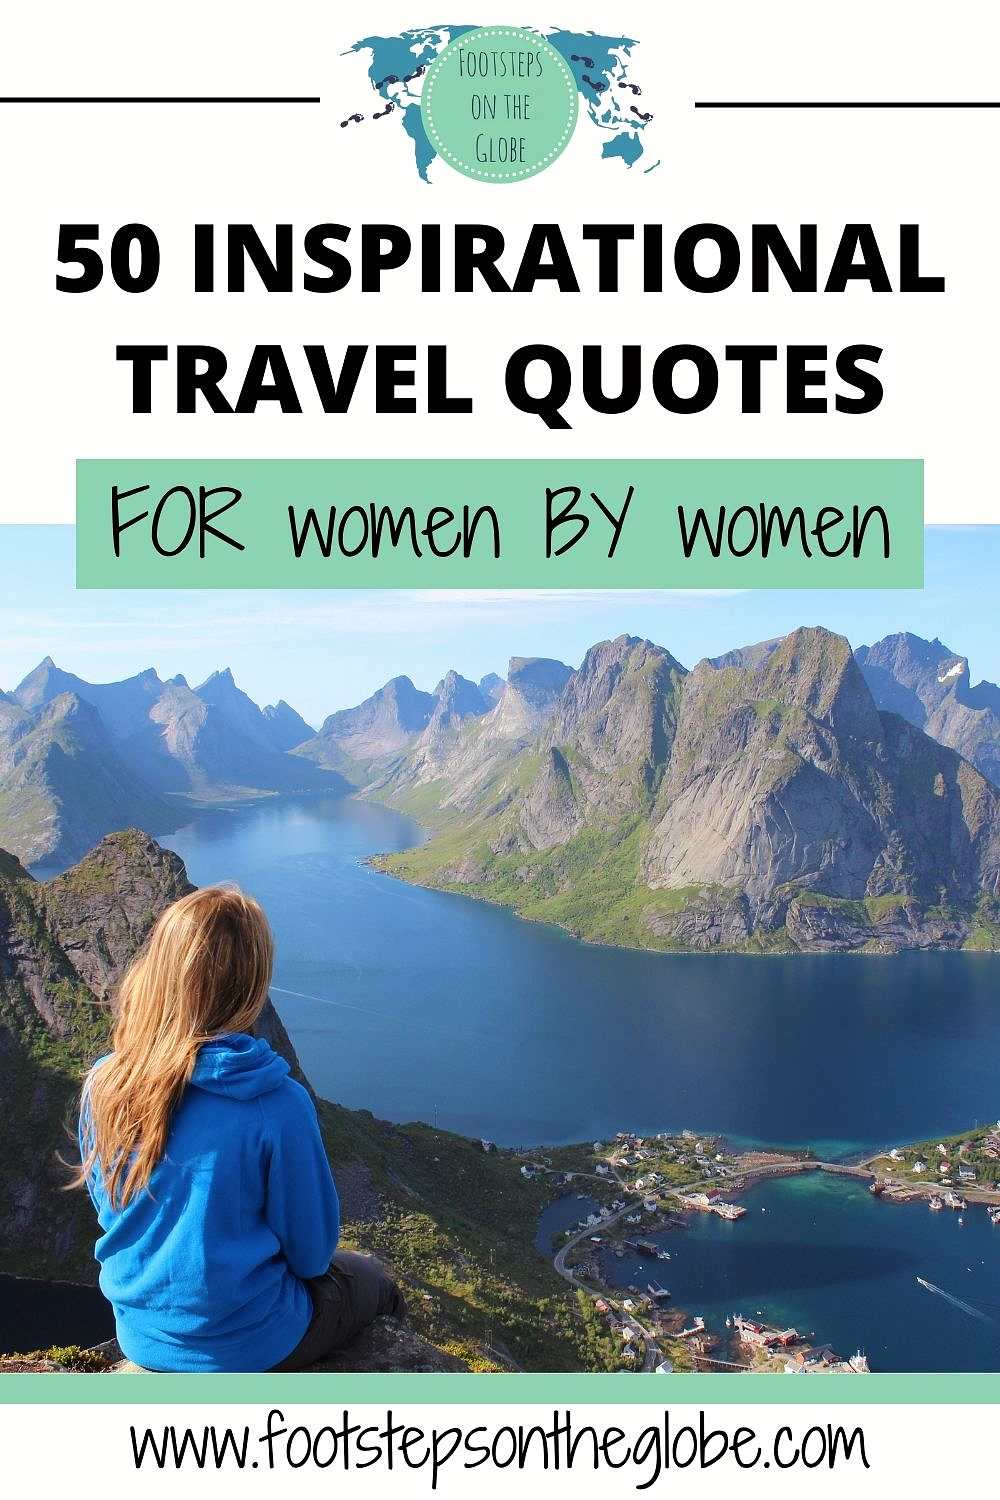 Pinterest image of a blonde woman wearing a blue hoodie facing a mountainous view with a large lake in front of her with the text: "50 inspirational travel quotes for women by women"